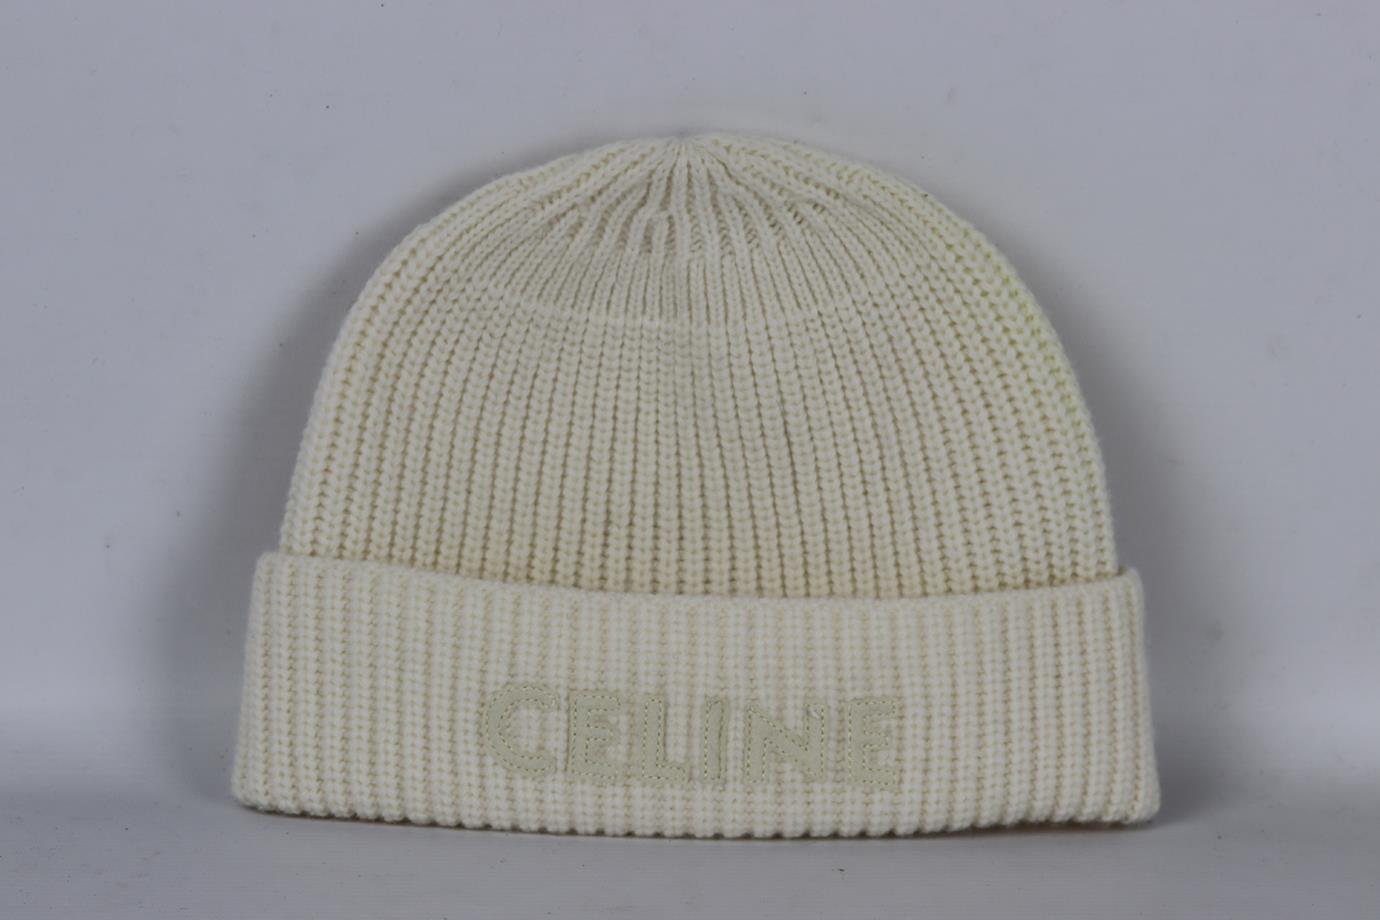 Celine logo detailed ribbed wool beanie. White. Slips on. 100% Wool. Does not come with dustbag or box. Size: One Size. Circumference: 18.4 in. Good condition - Some discolouration at side; see pictures.
